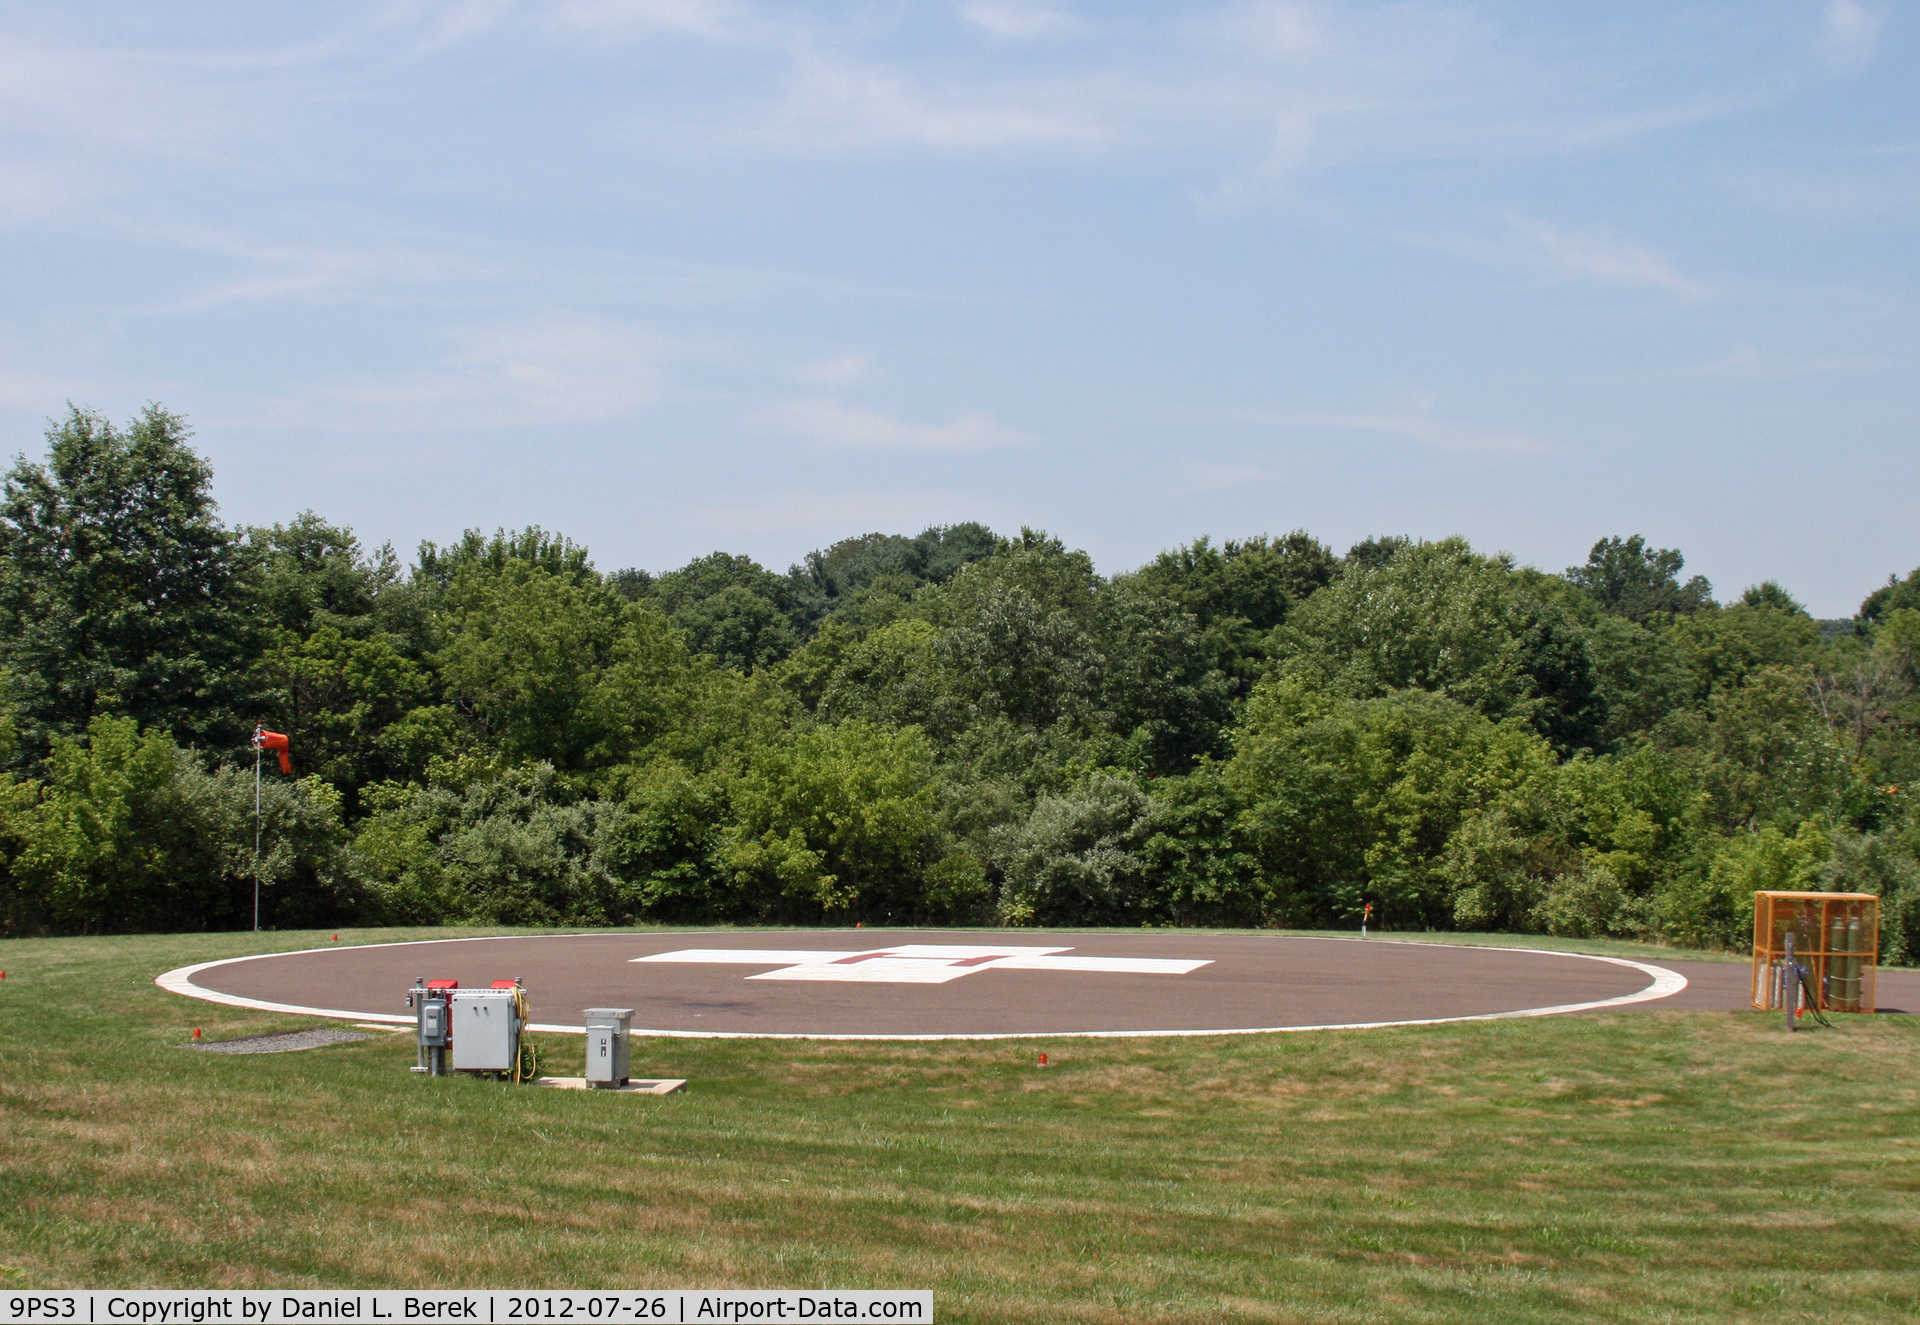 Doylestown Heliport (9PS3) - This is the helipad that serves the emergency services for Doylestown Hospital.